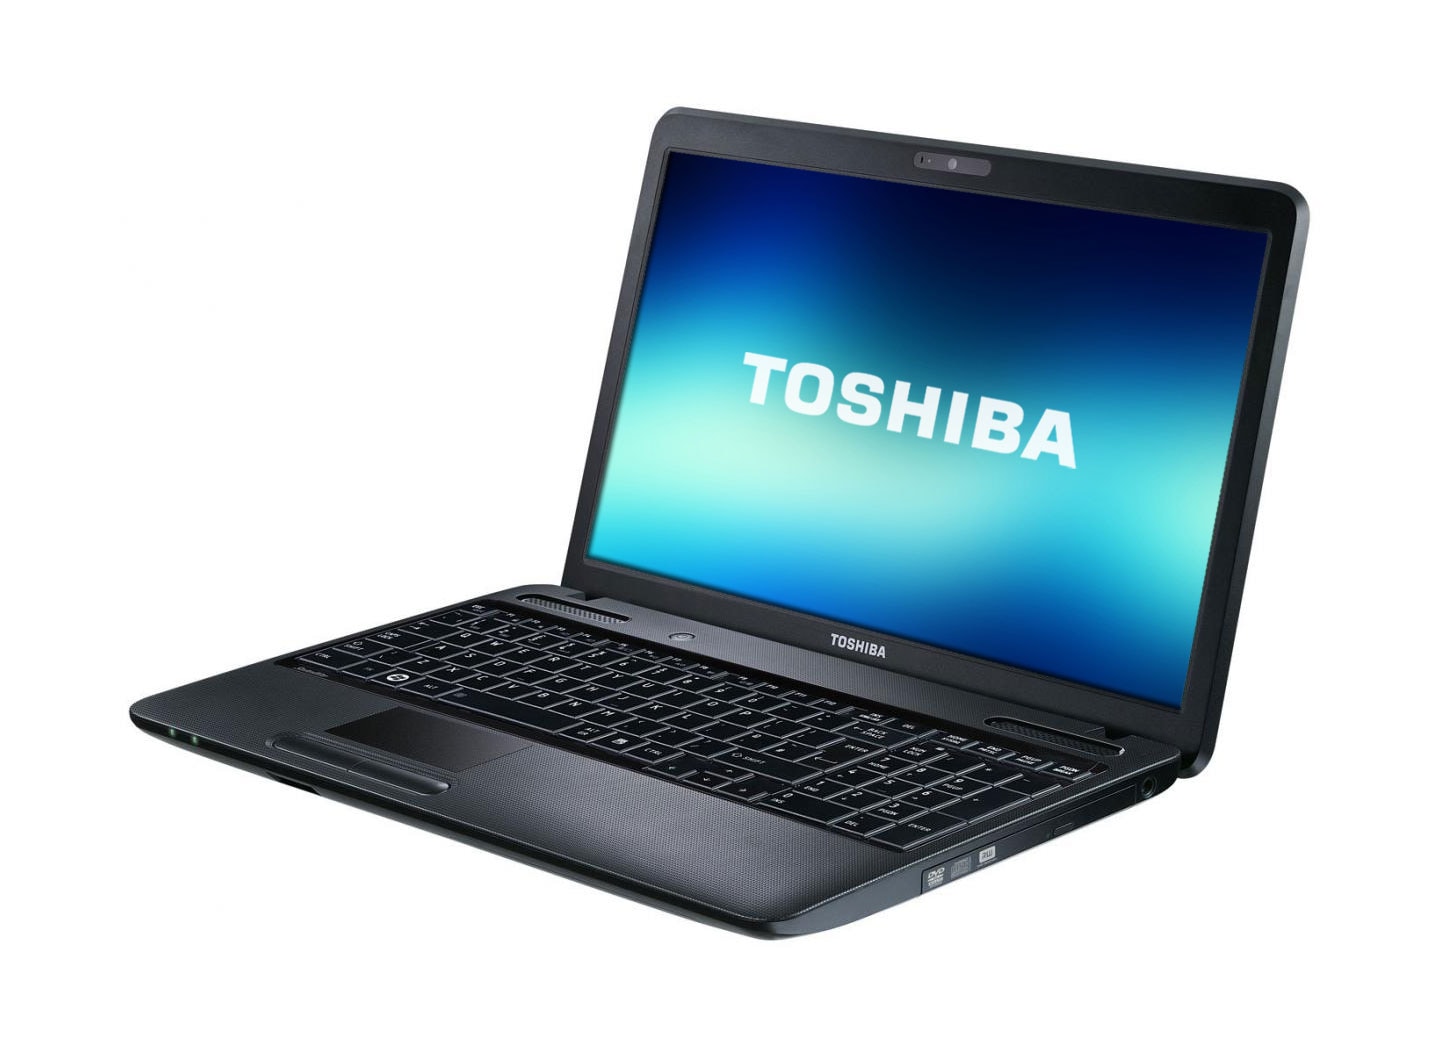 toshiba value added package windows 8